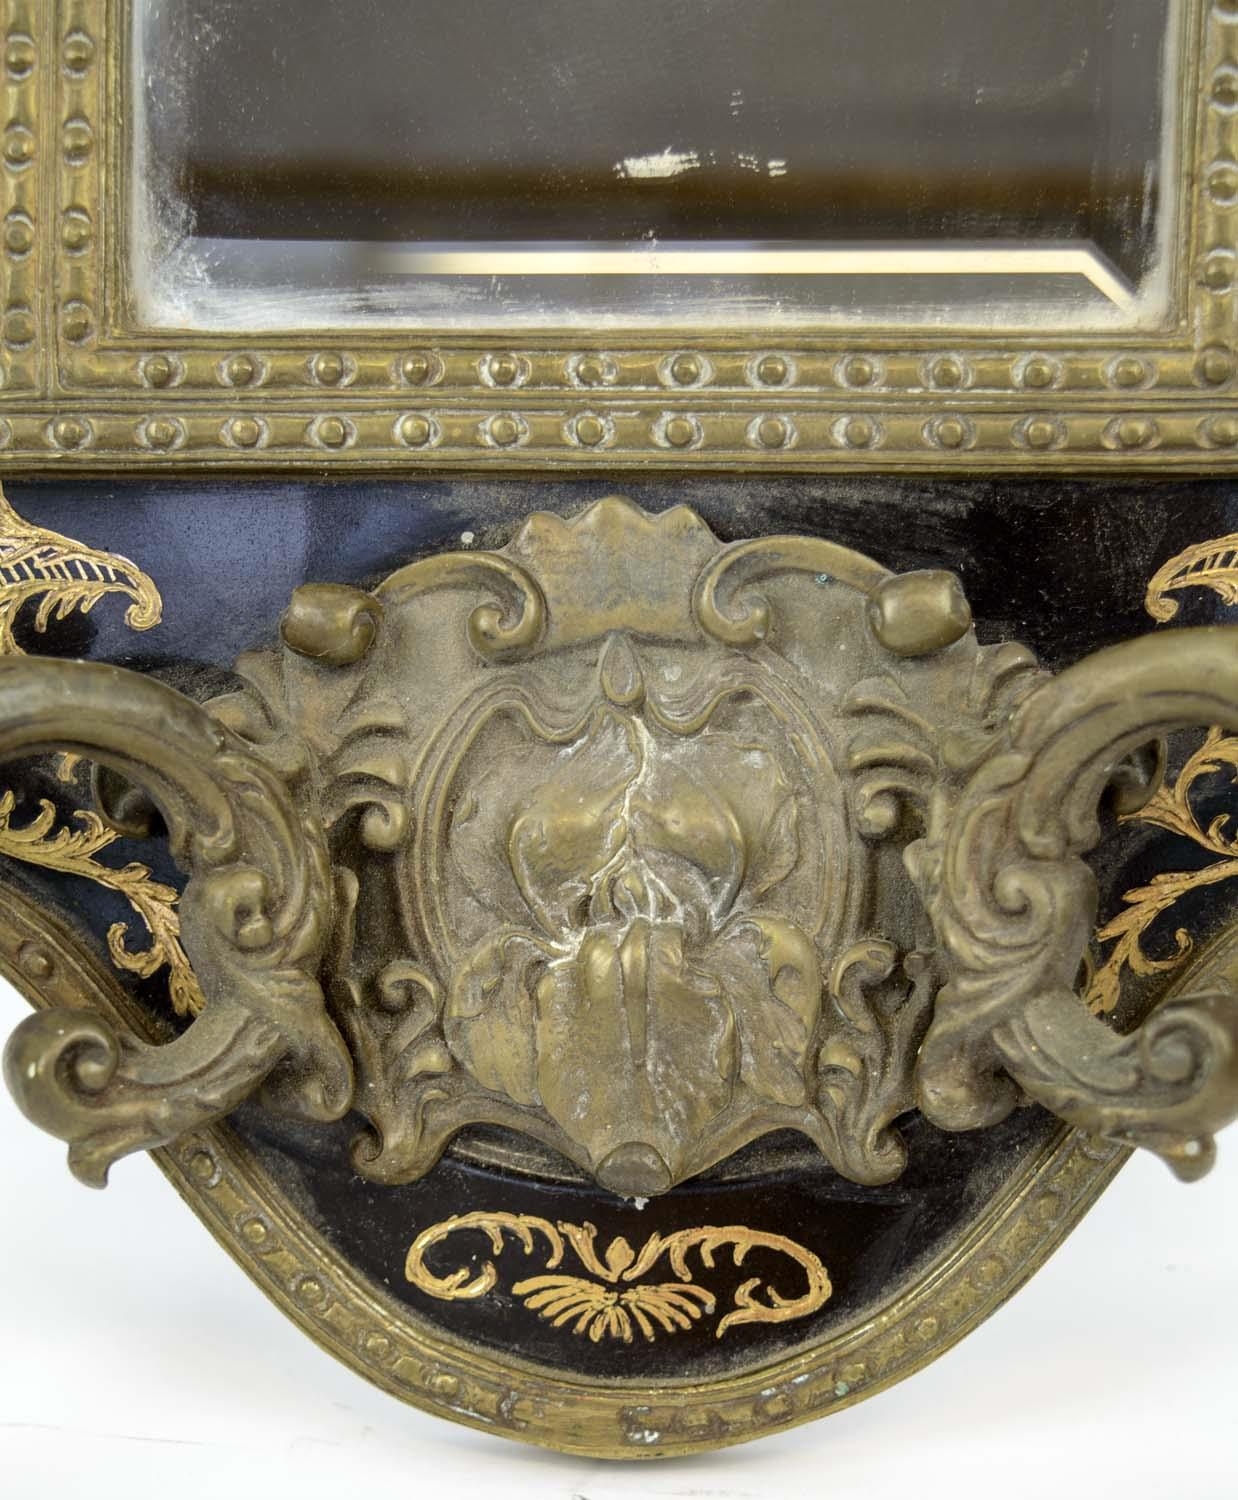 WALL SCONCES, a pair, 18th century Chinese export style, with ceramic inset famille noire panels, - Image 7 of 9